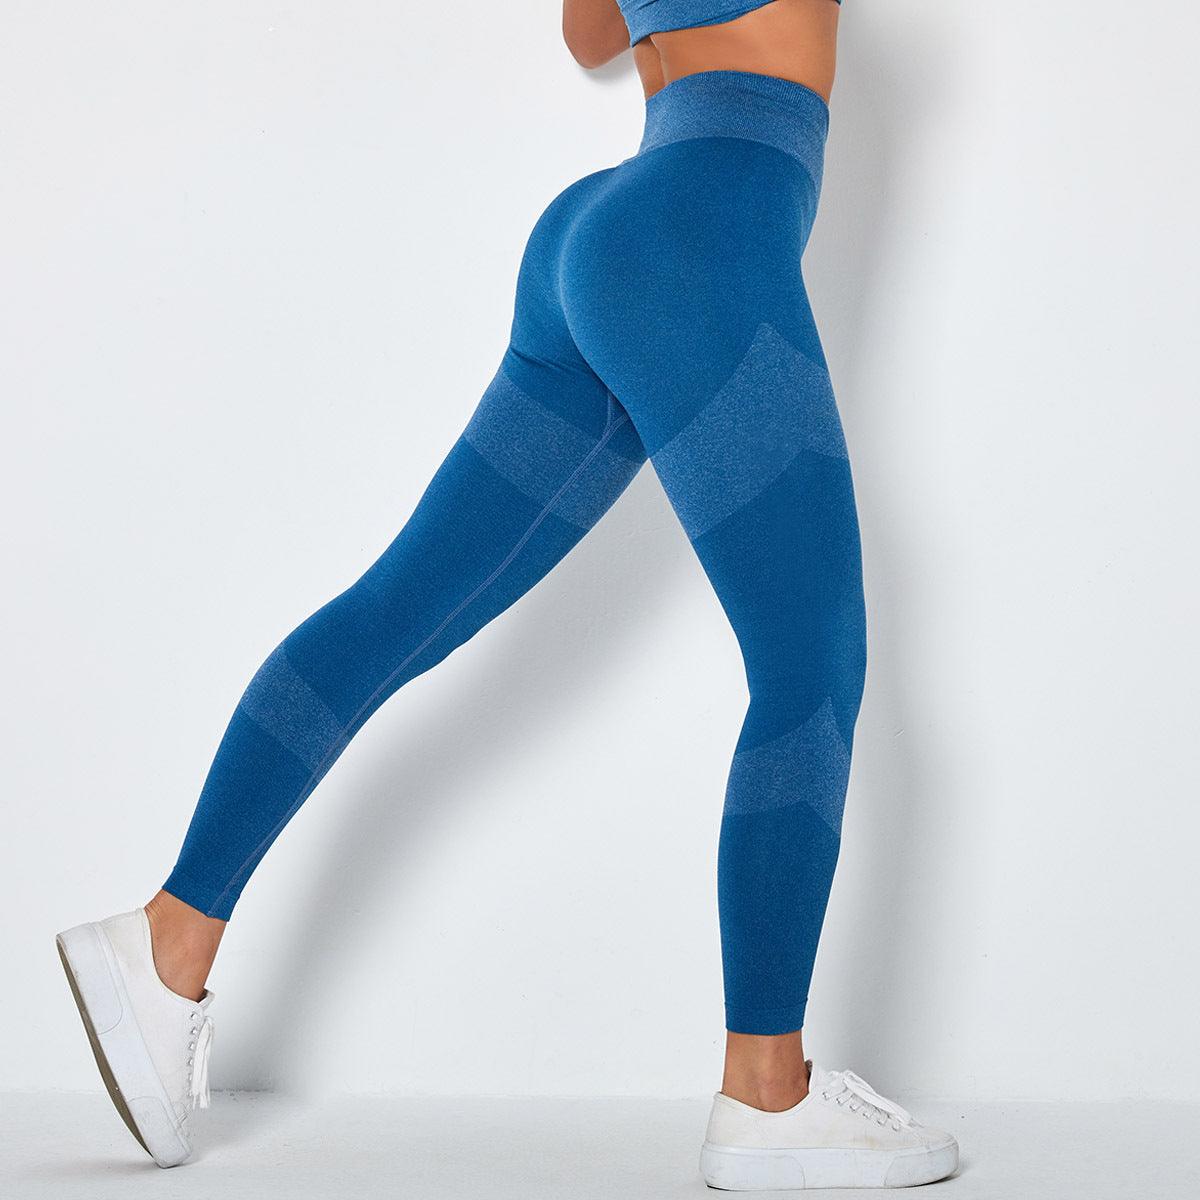 Seamless Knitted Slim Fit Quick-Drying Hip Yoga Pants - ForVanity Leggings, women's sports & entertainment Activewear Pants